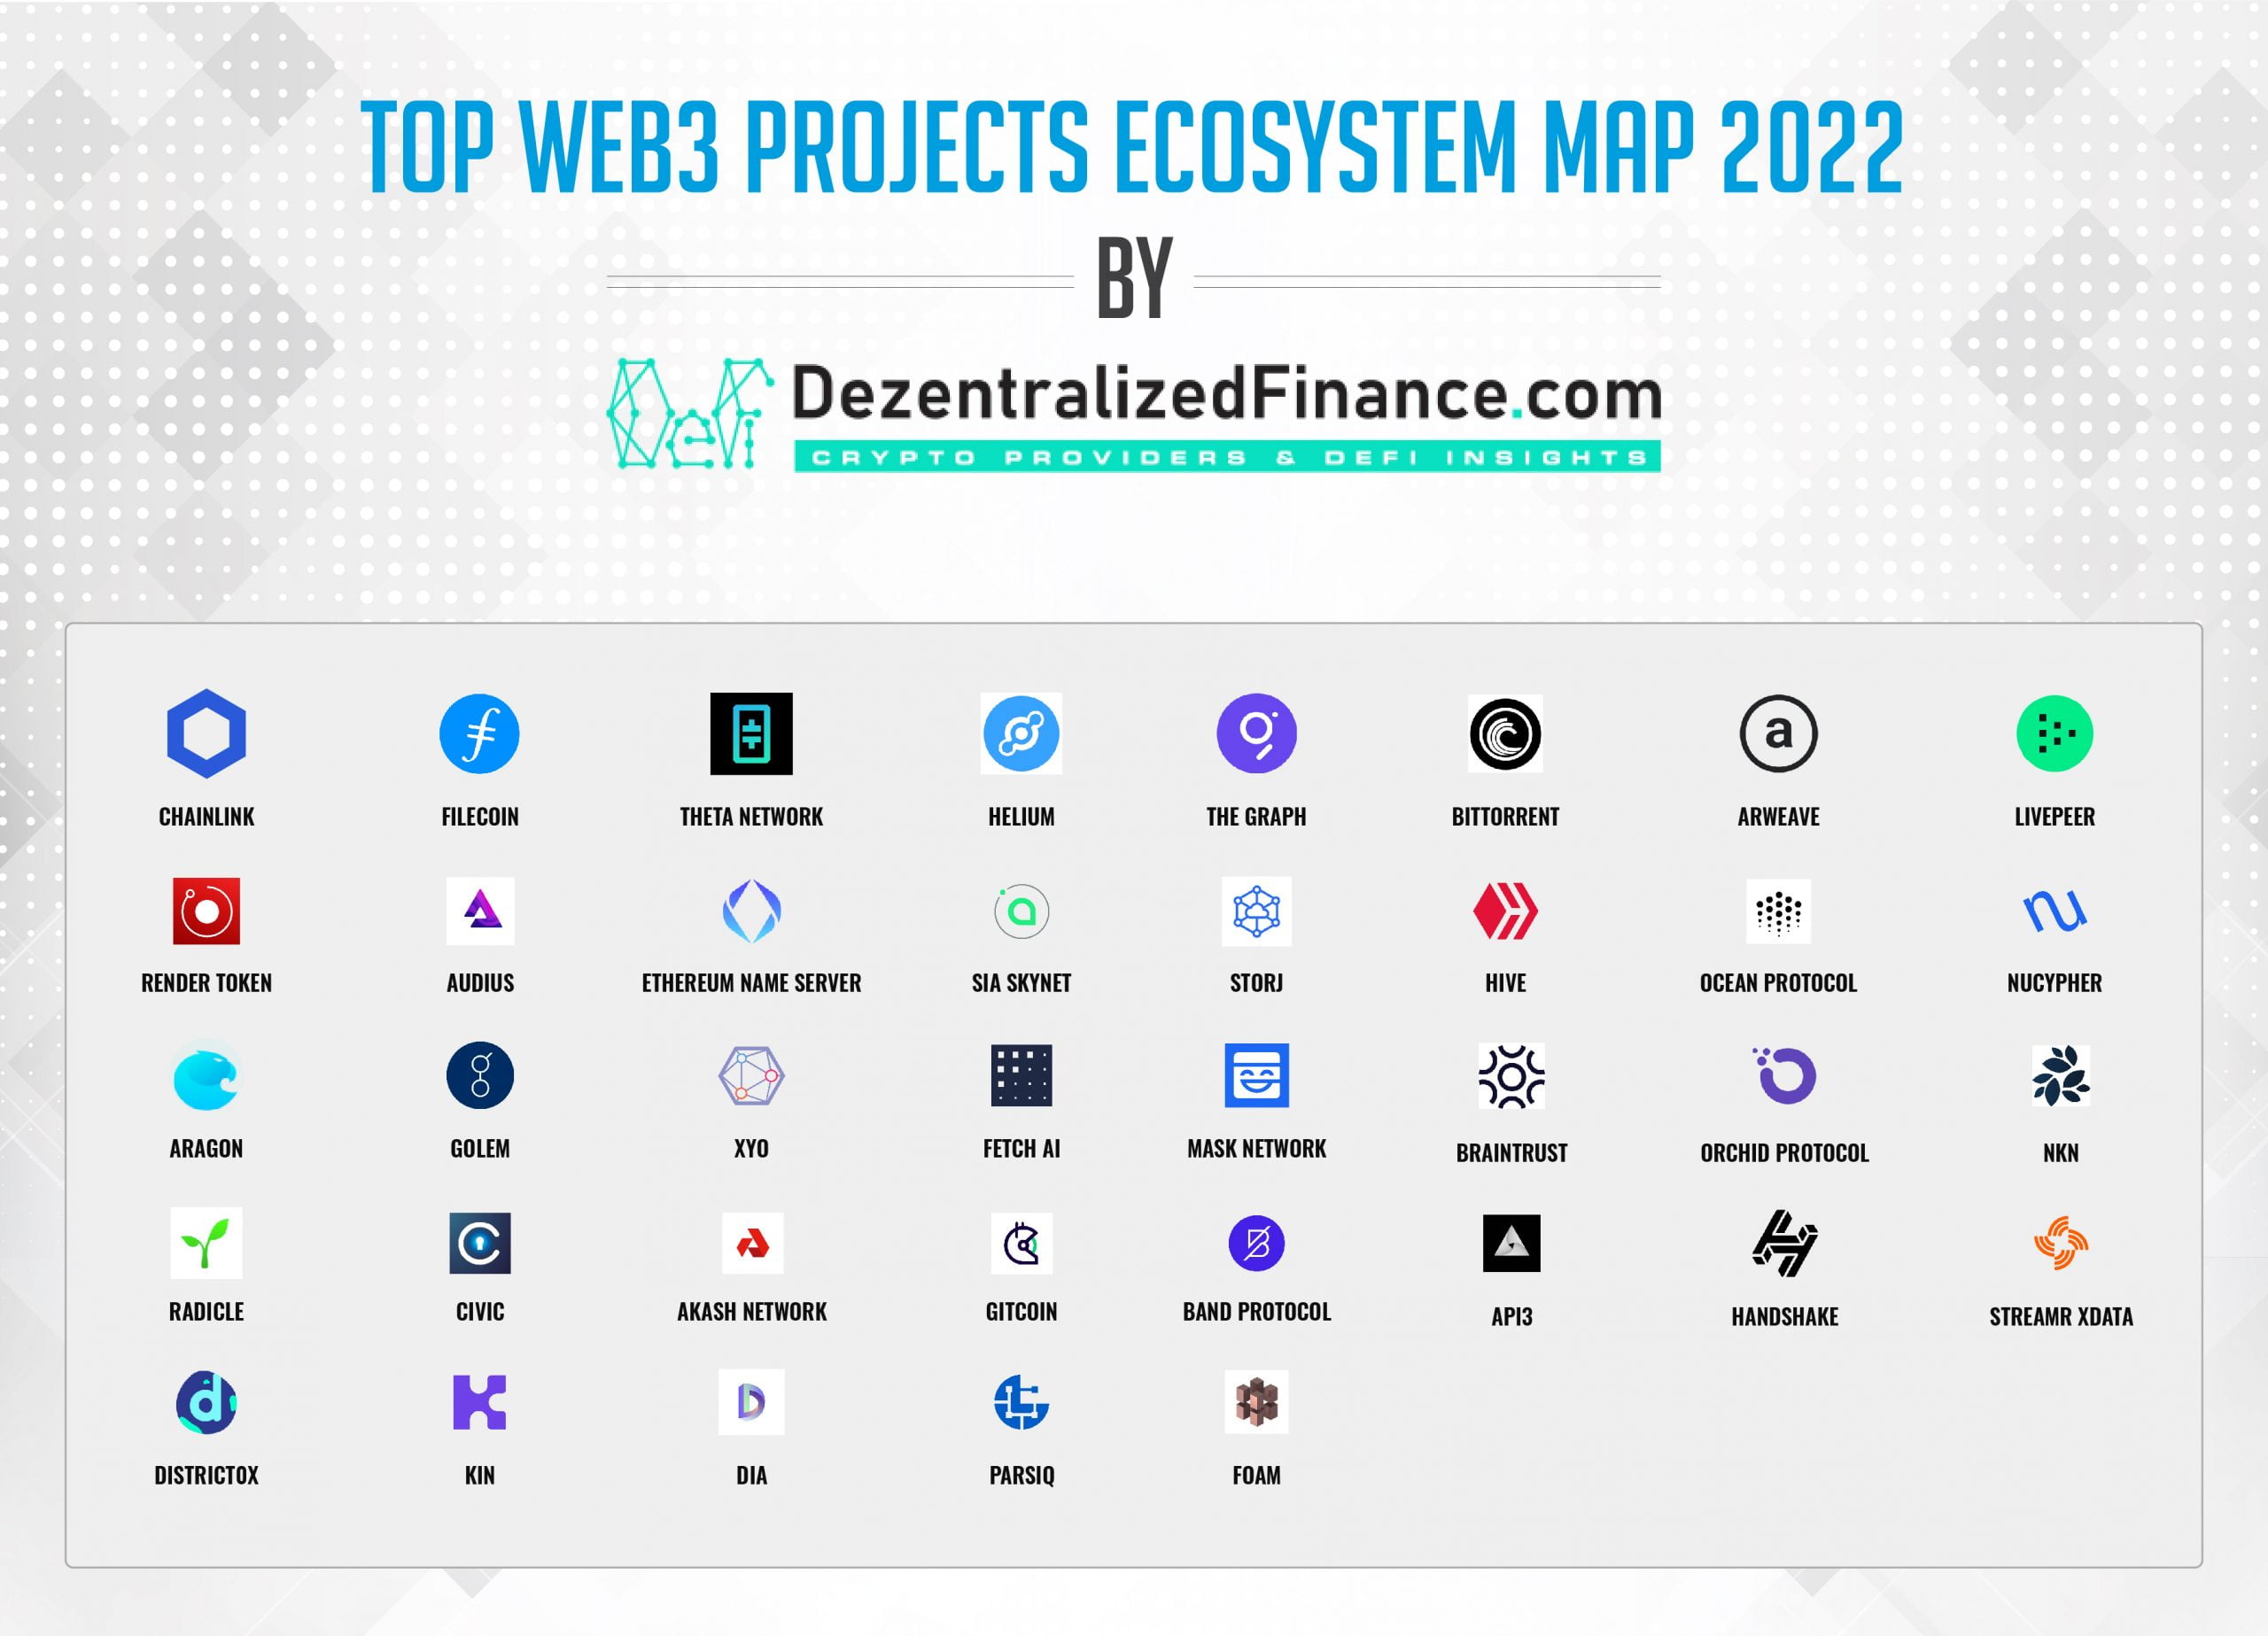 Top Web3 Projects Ecosystem scaled